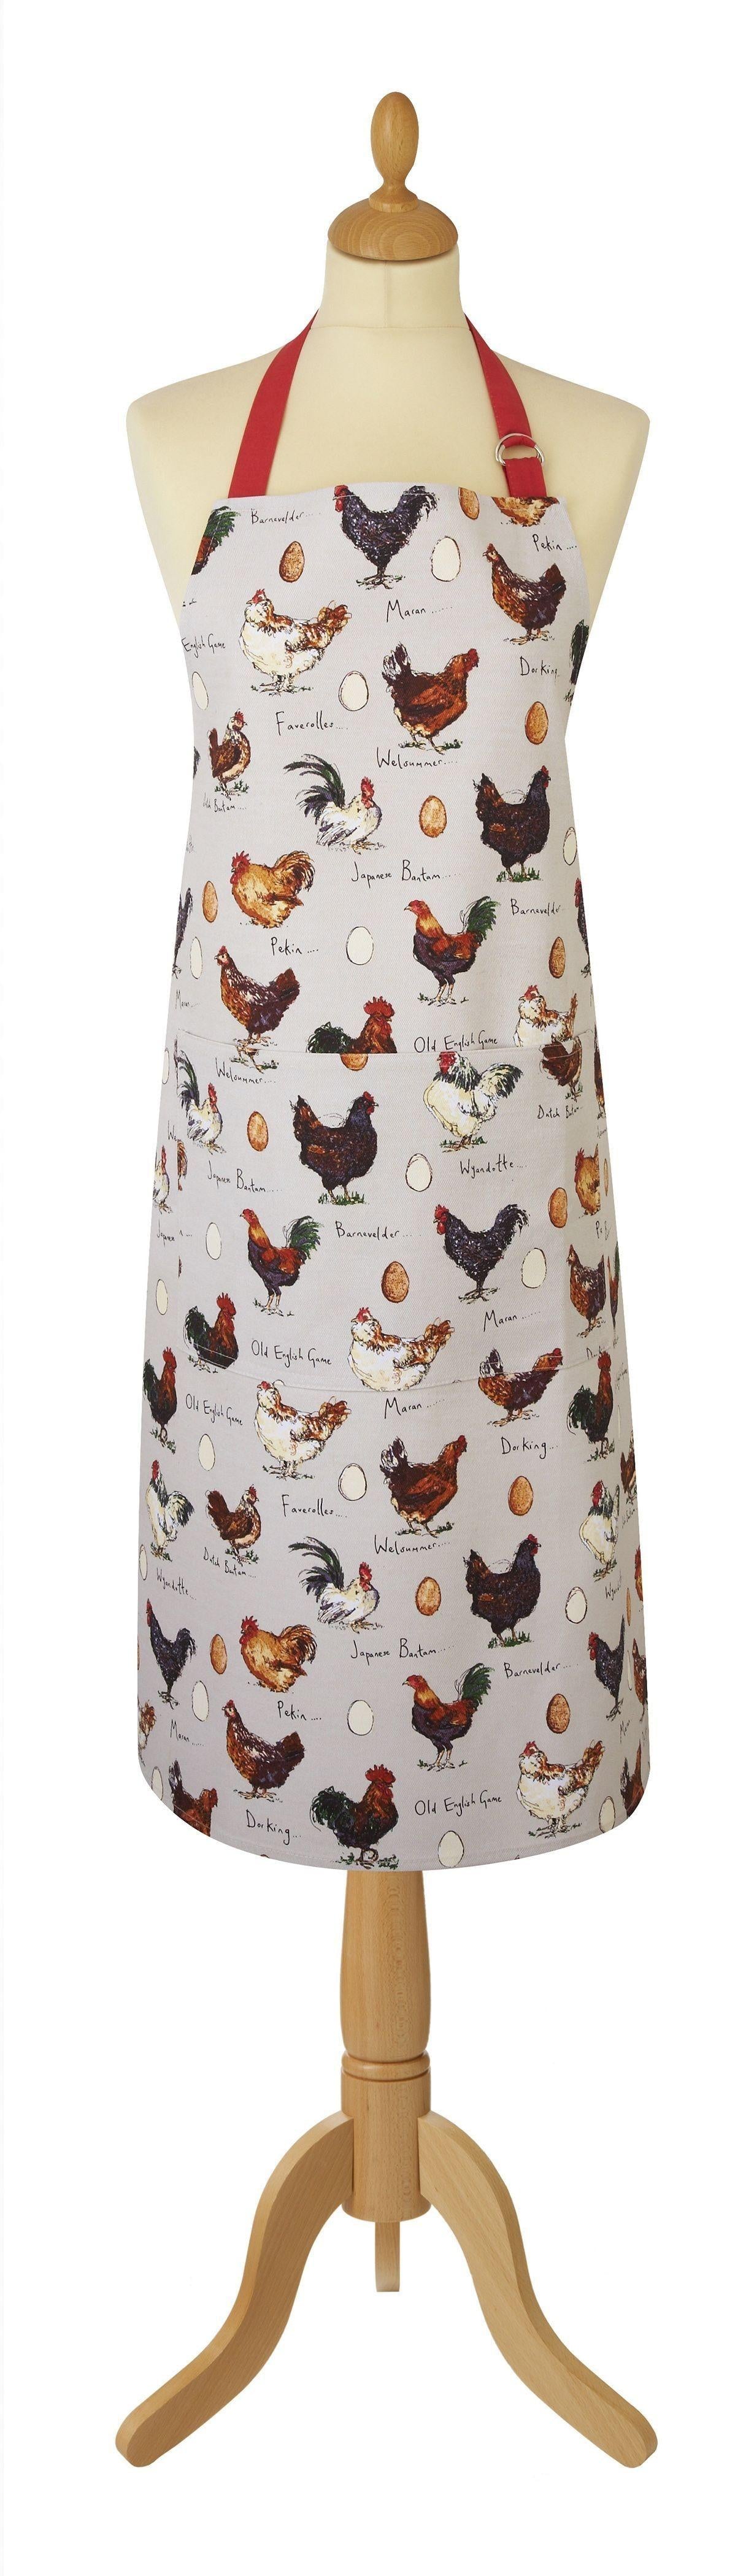 Ulster Weavers Cotton Apron - Chicken & Egg